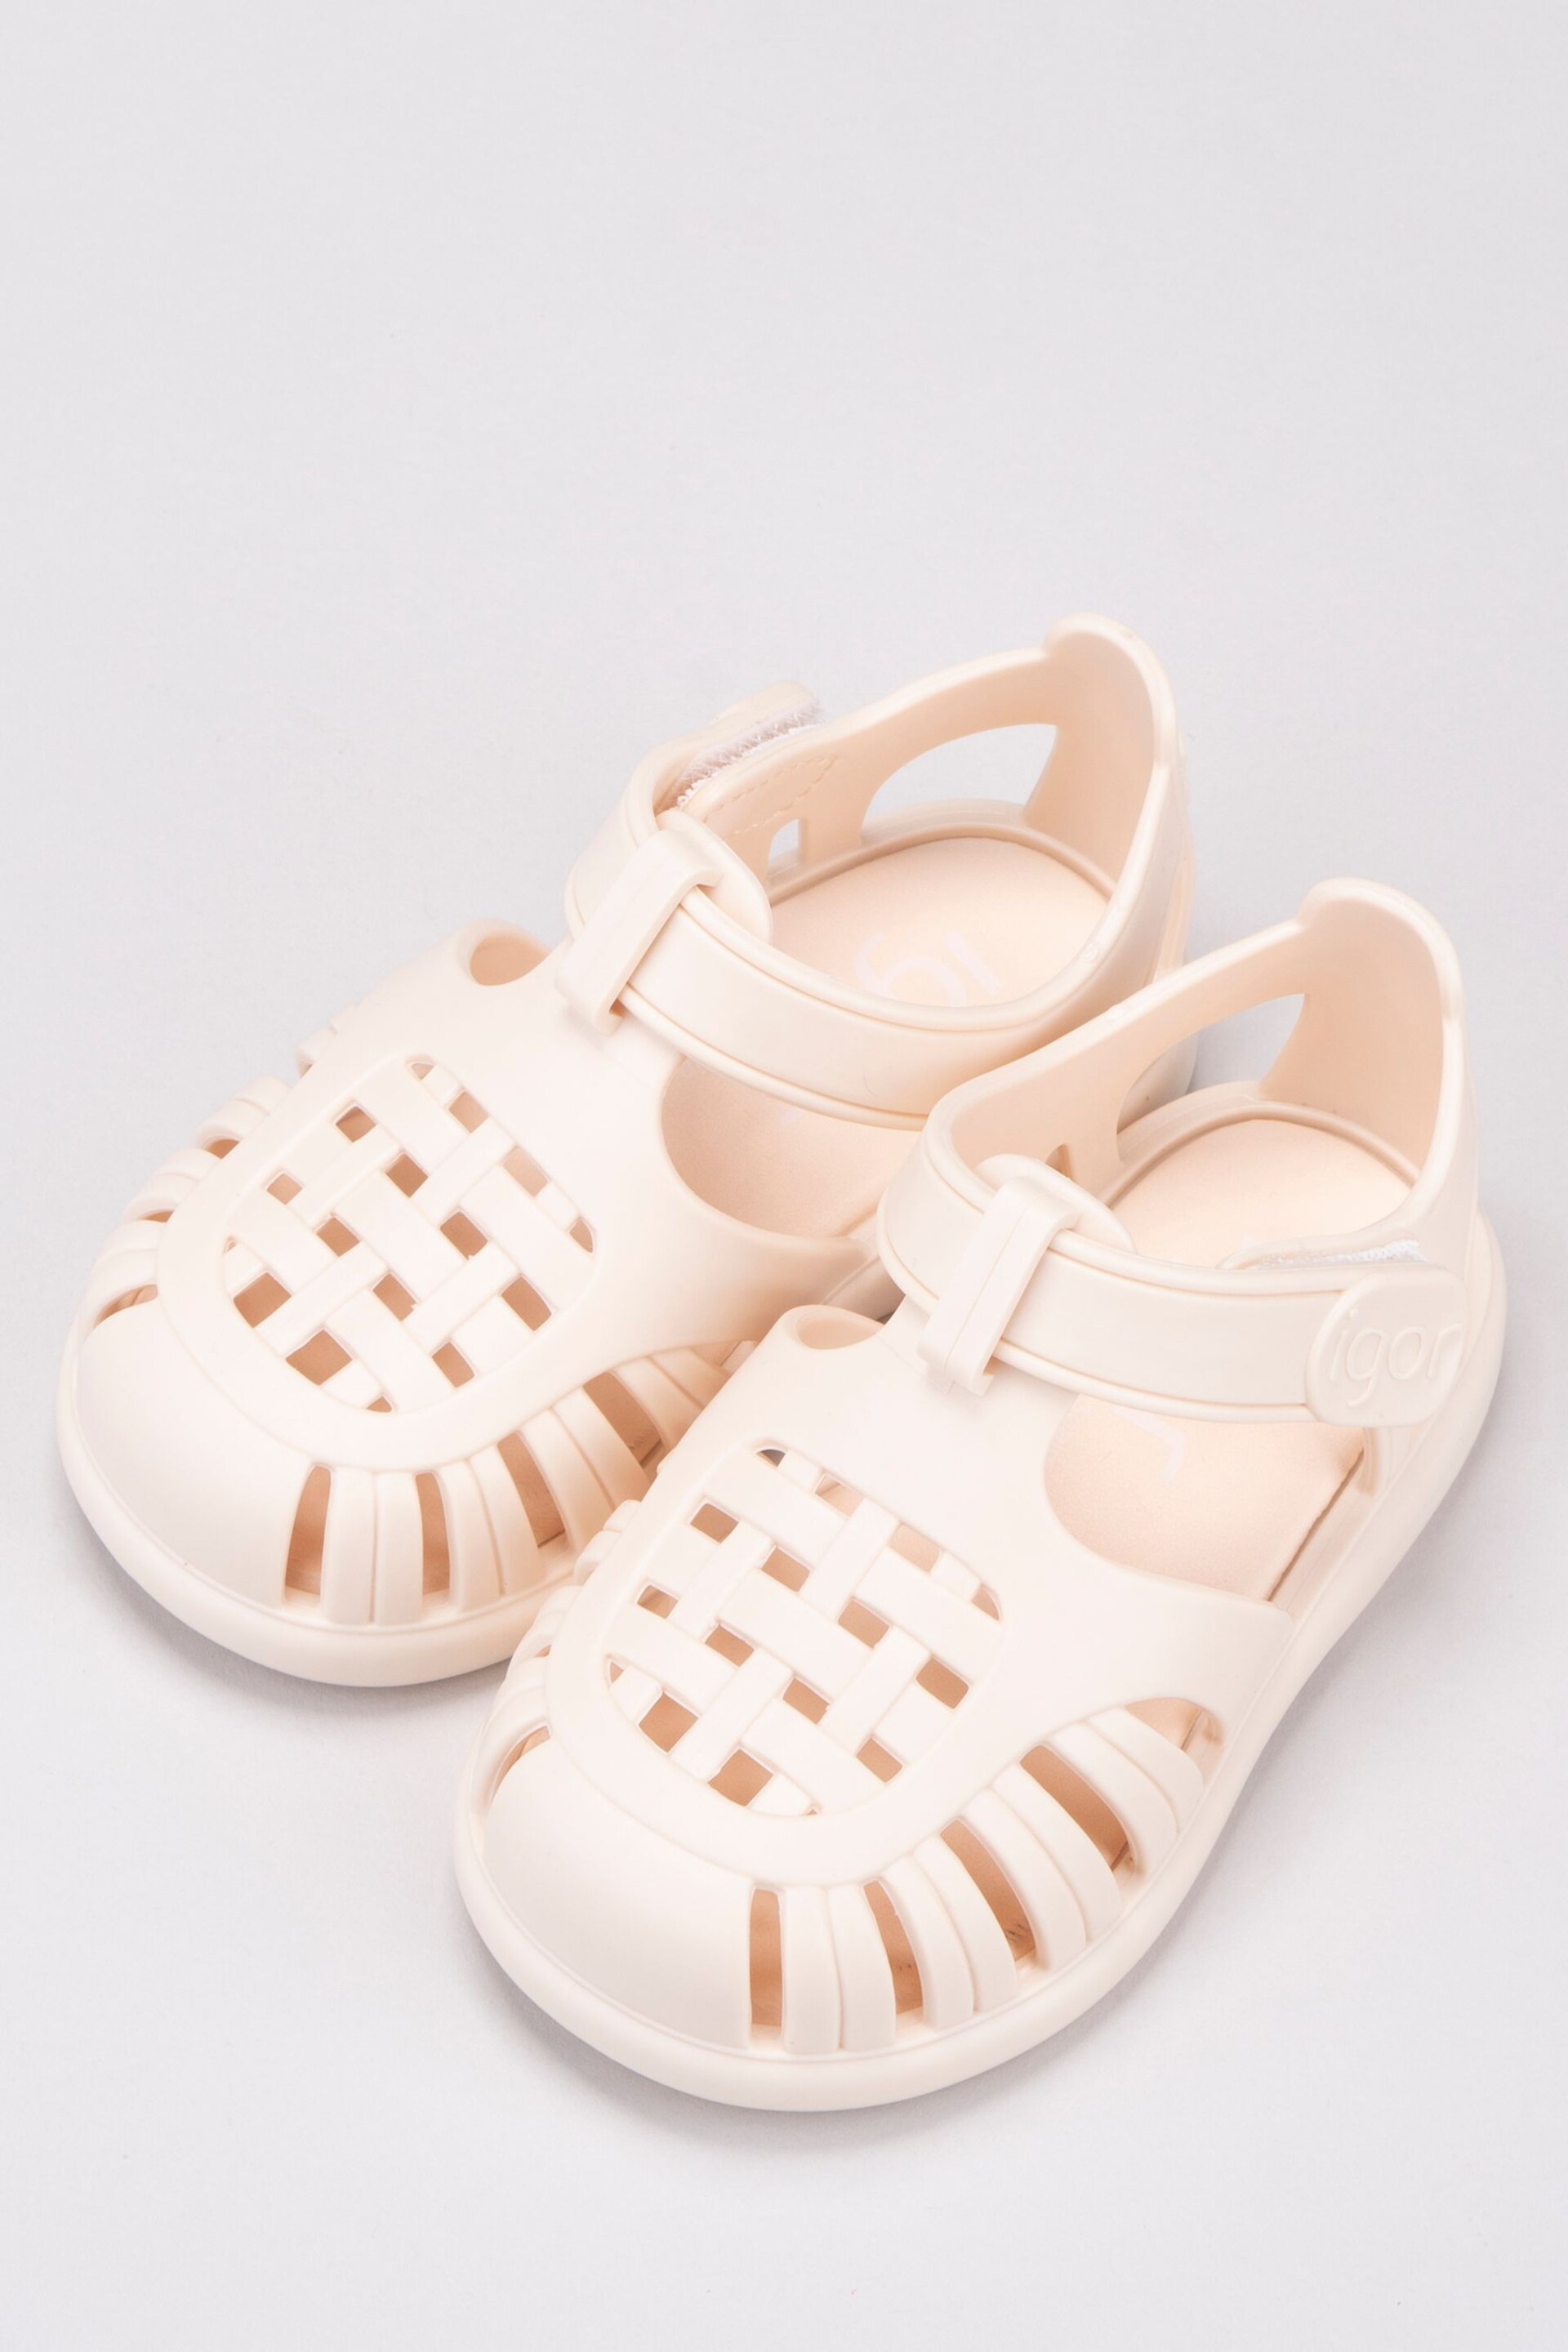 Igor Tobby Solid Sandals - Image 8 of 8